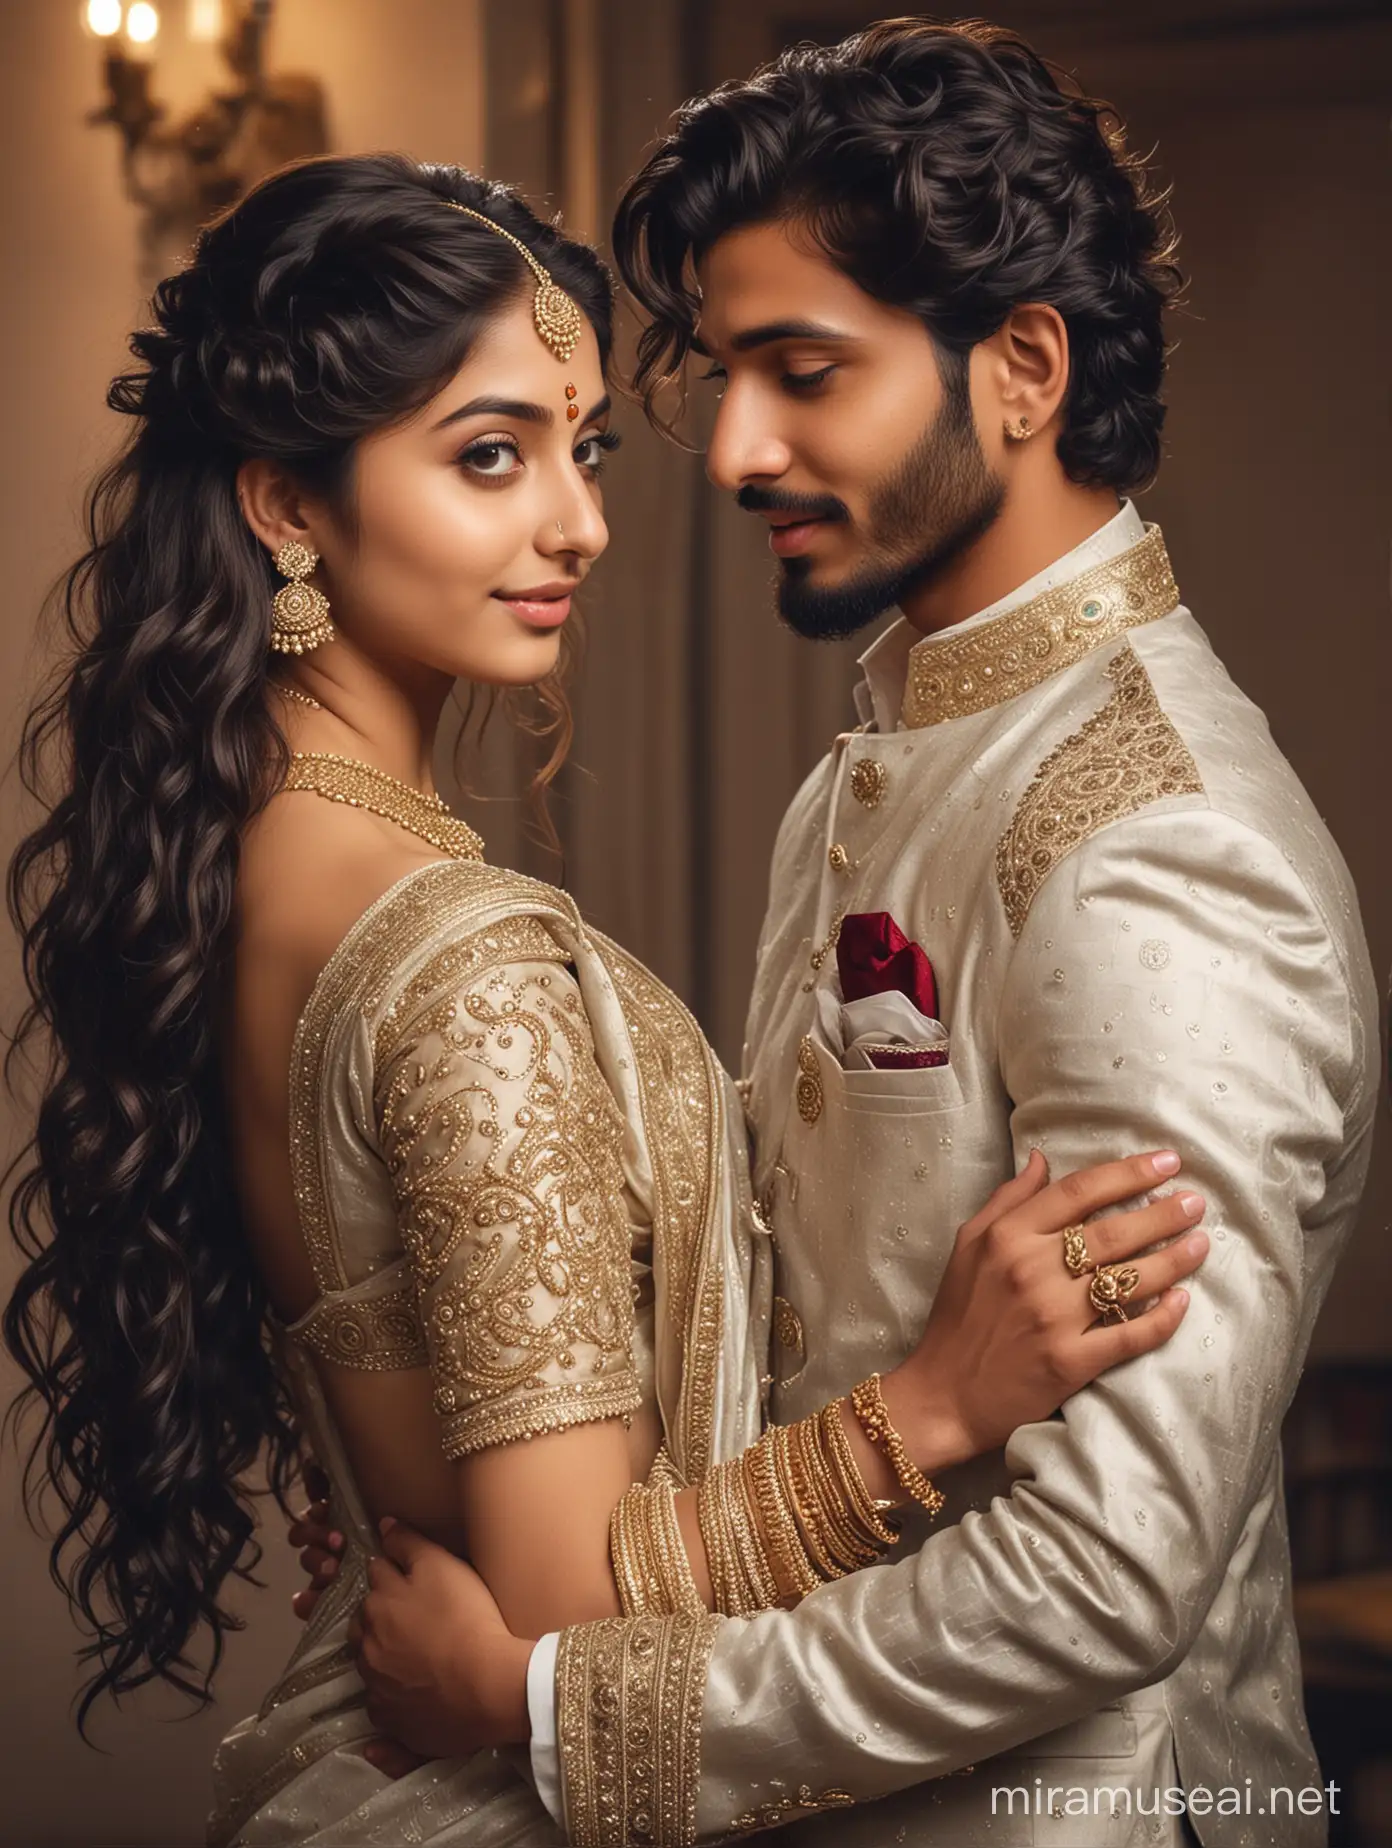 two intimate lovers, indian handsome boy, 22 years old, european features, formal suit, light trim beard, alfa male, girl, 18 years old, most beautiful indian girl, full body jewelry, elegant saree look, low cut back, long curly hair, touching head to boy shoulder, shy and modest smile, boy comforting girl with one hand on back of girl, photo realistic, 4k.